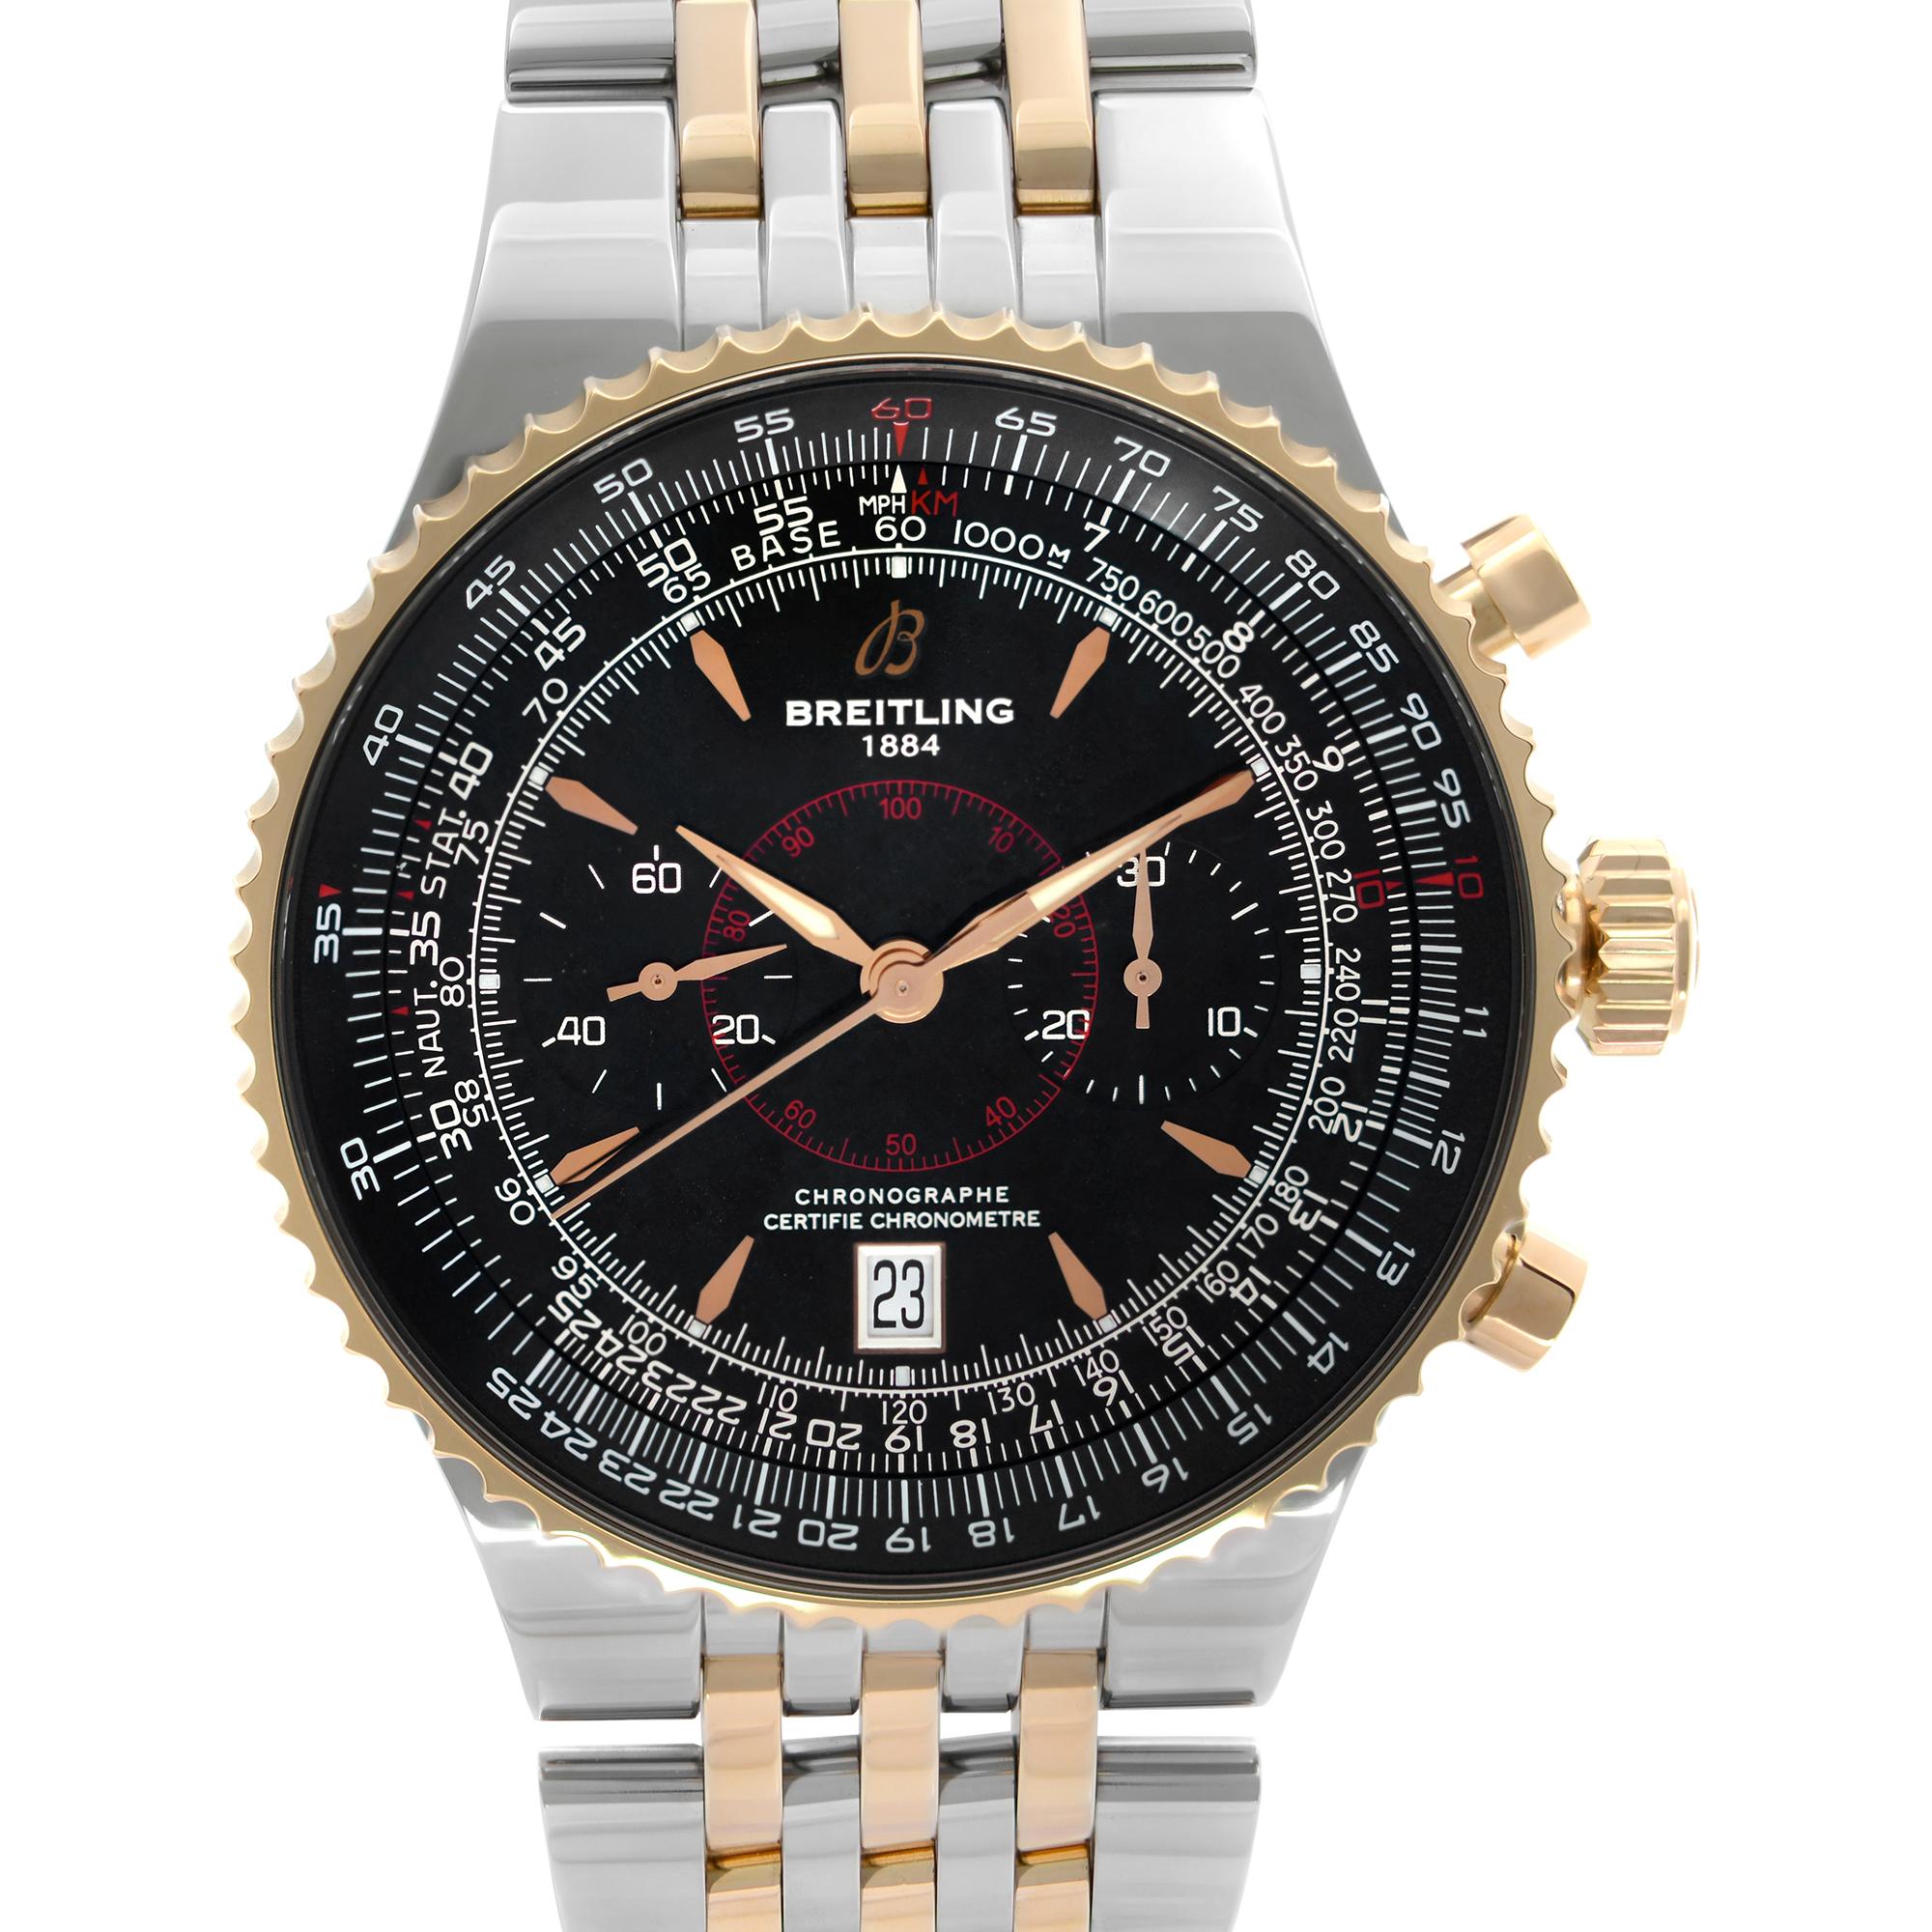 Pre Owned Breitling Montbrillant Legende Rose Gold Steel Black Dial Automatic Watch C23340. 18k rose gold Bezel. Two-tone Gold plated Steel Band.  This Beautiful Timepiece is Powered by Mechanical (Automatic) Movement And Features: Round Stainless